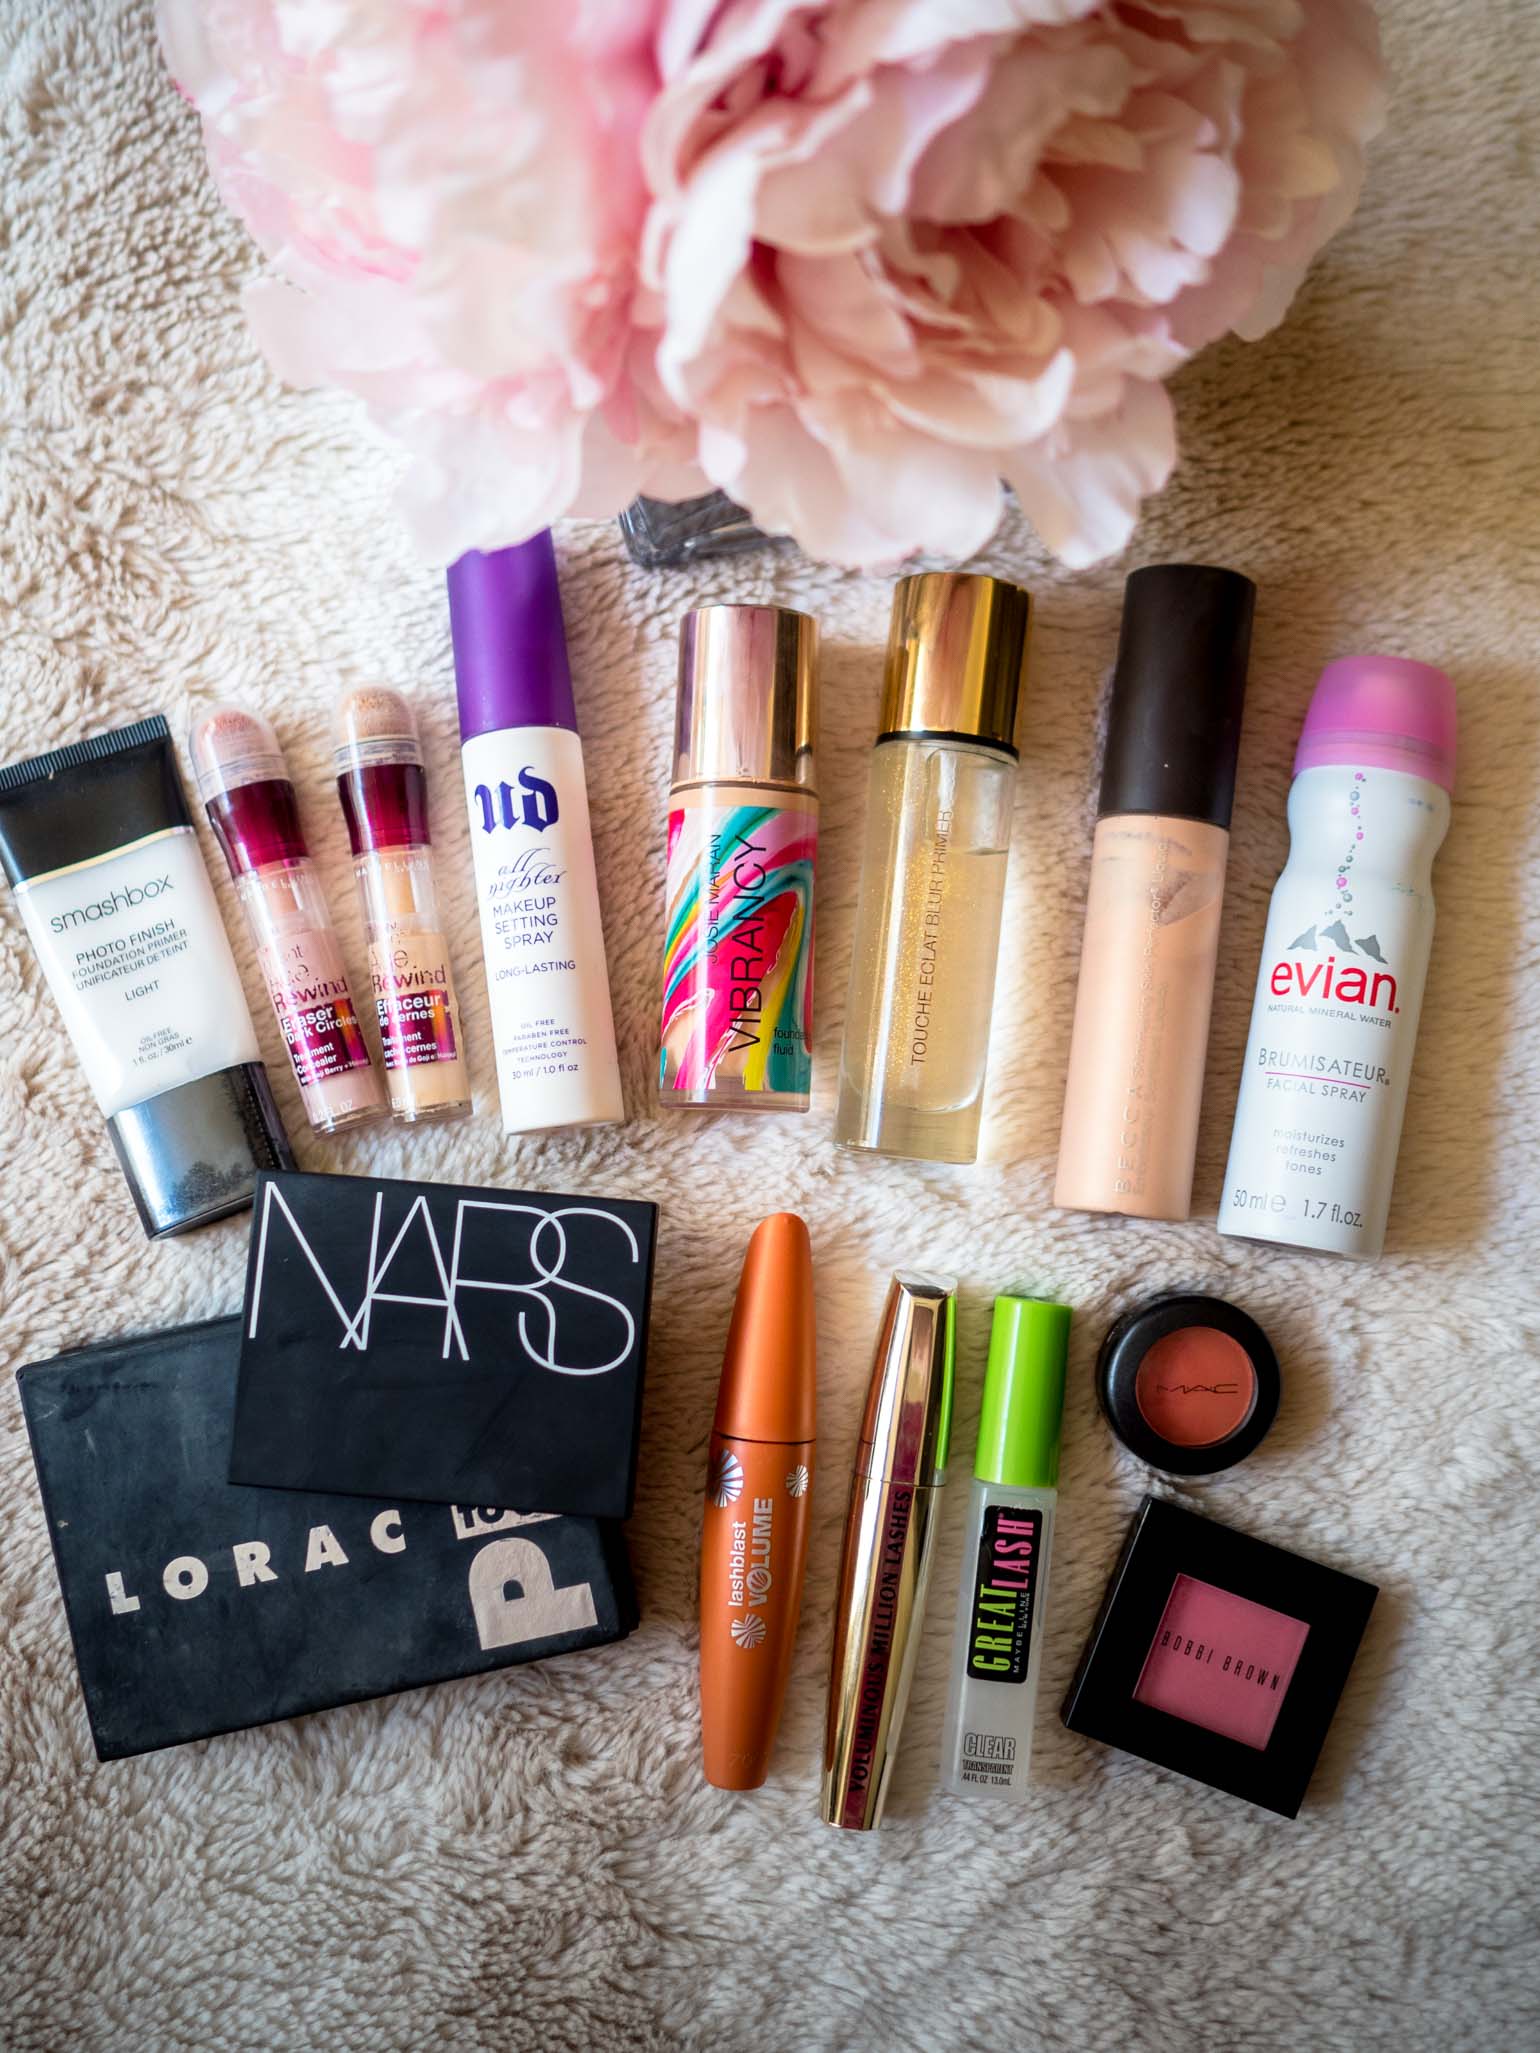 Dallas fashion blogger shares her makeup routine for blog photoshoots 